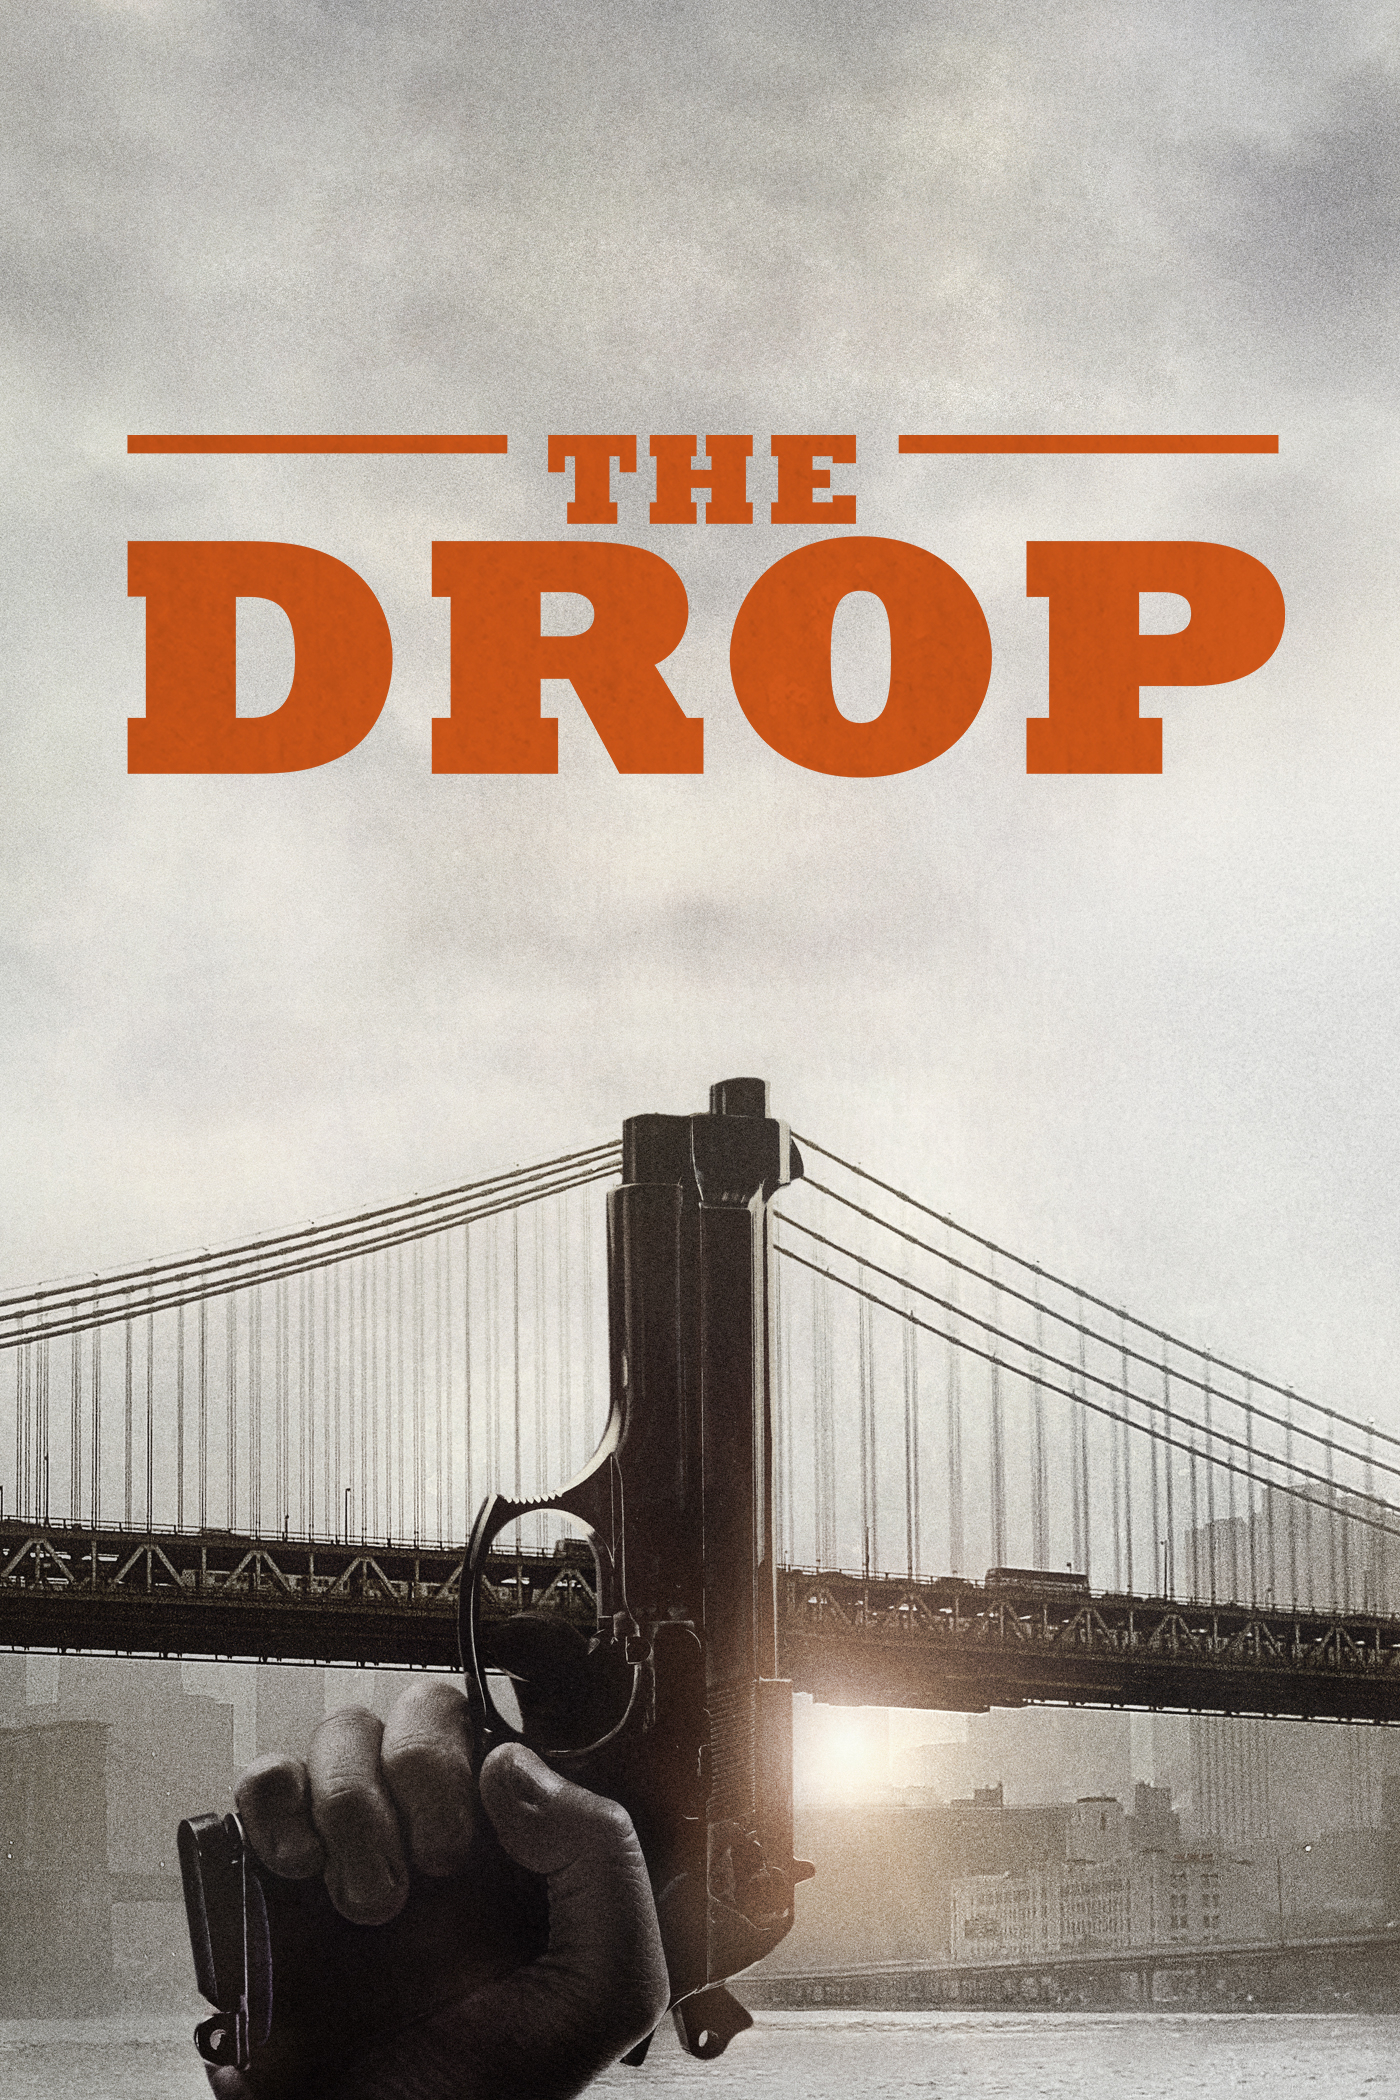 Poster for the movie "The Drop"